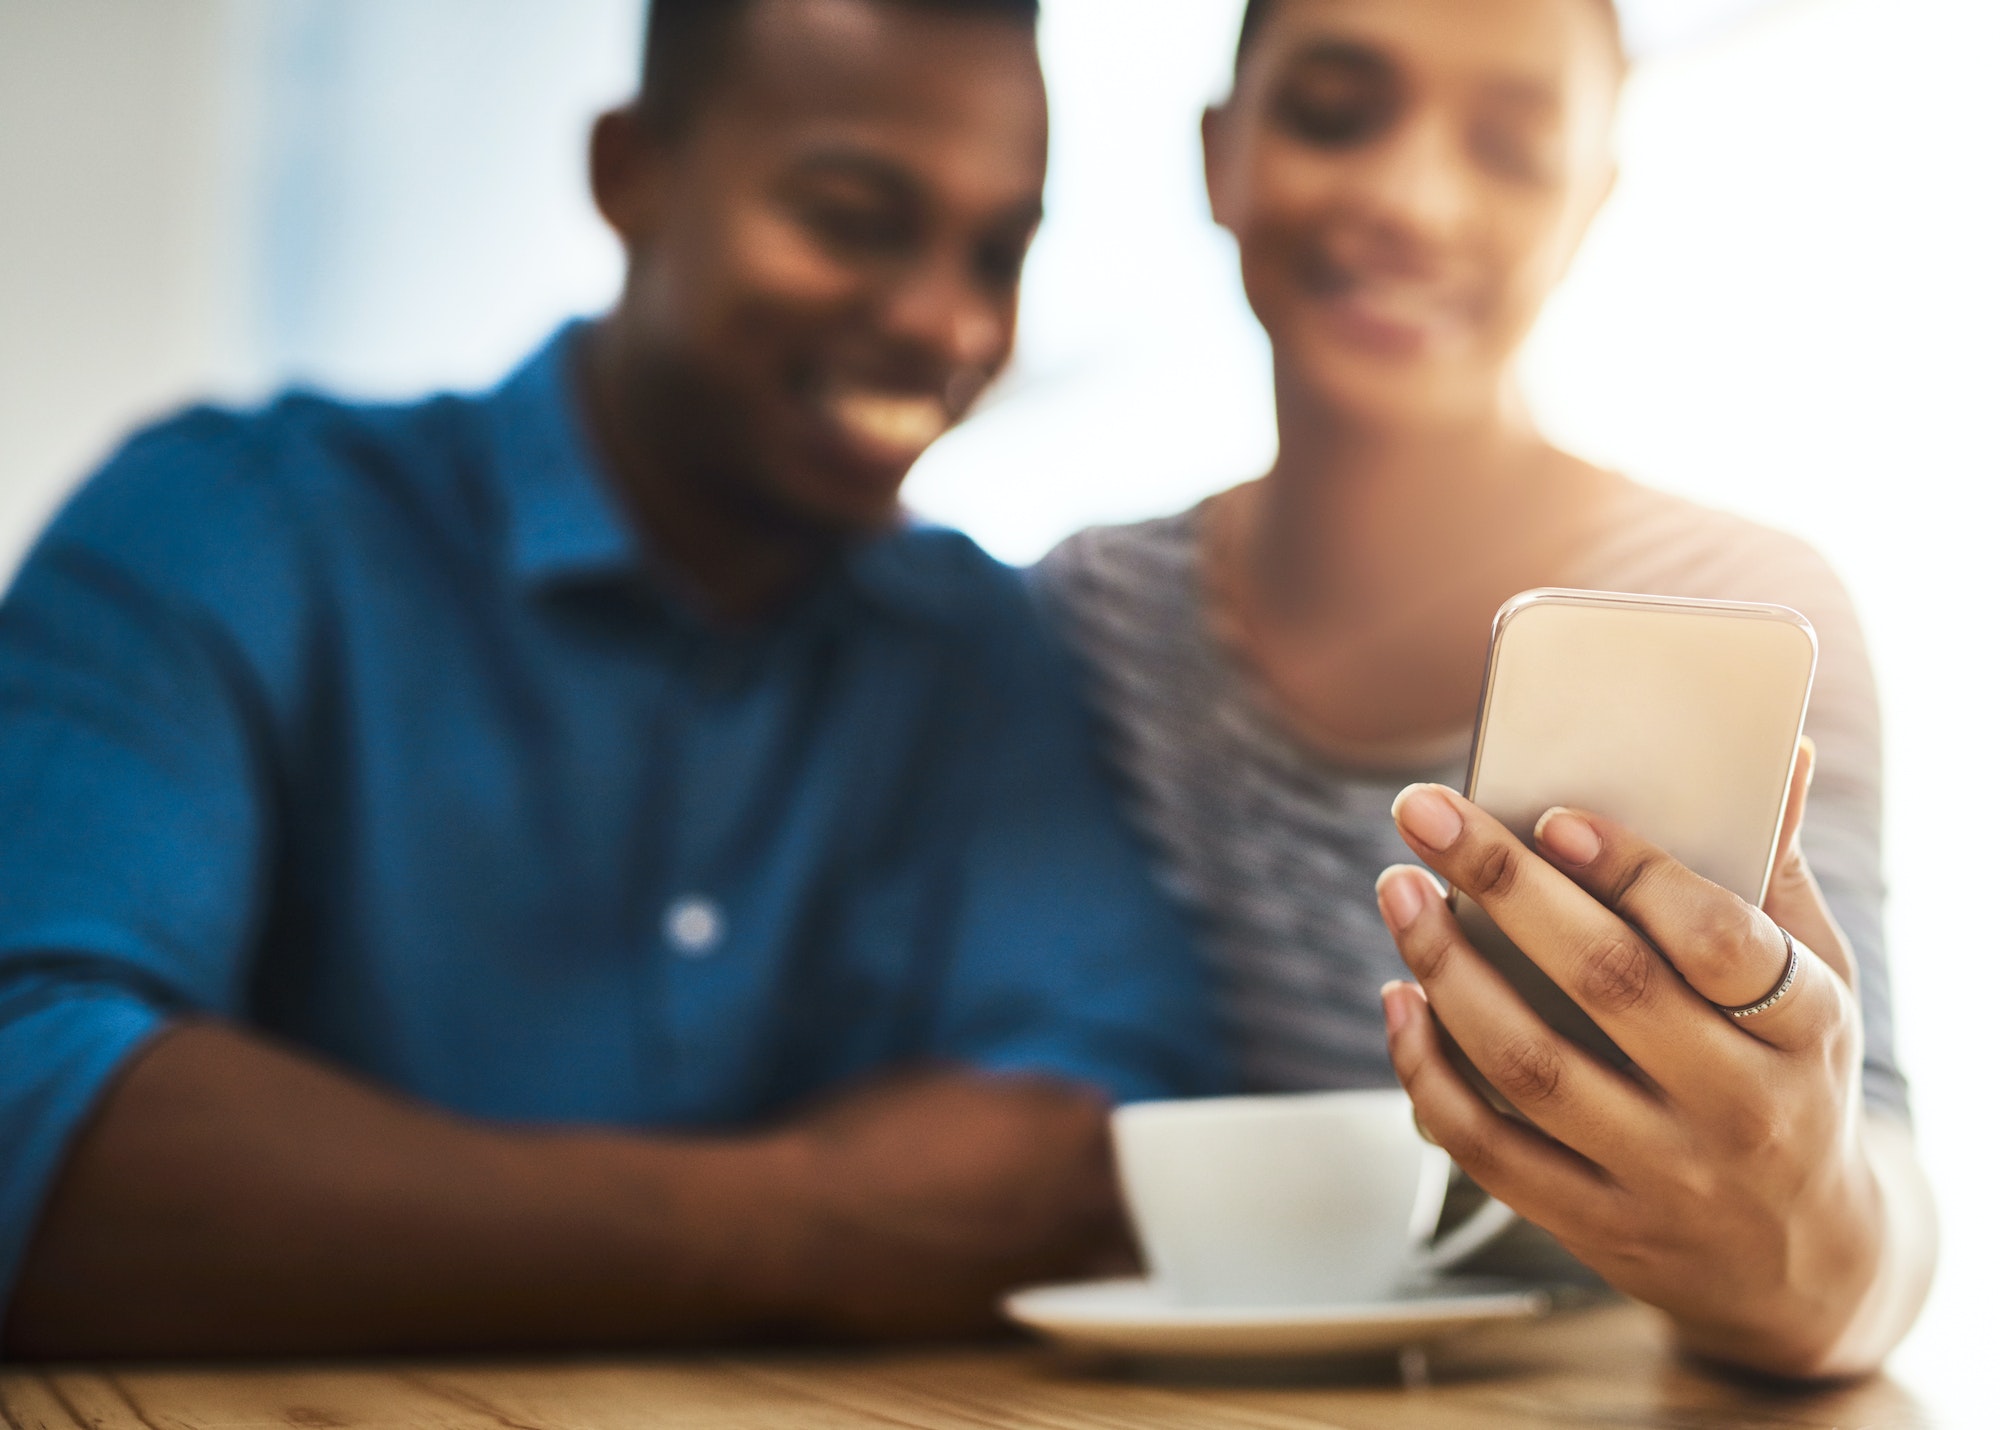 Shot of a young man and woman using a mobile phone together on a date at a coffee shop